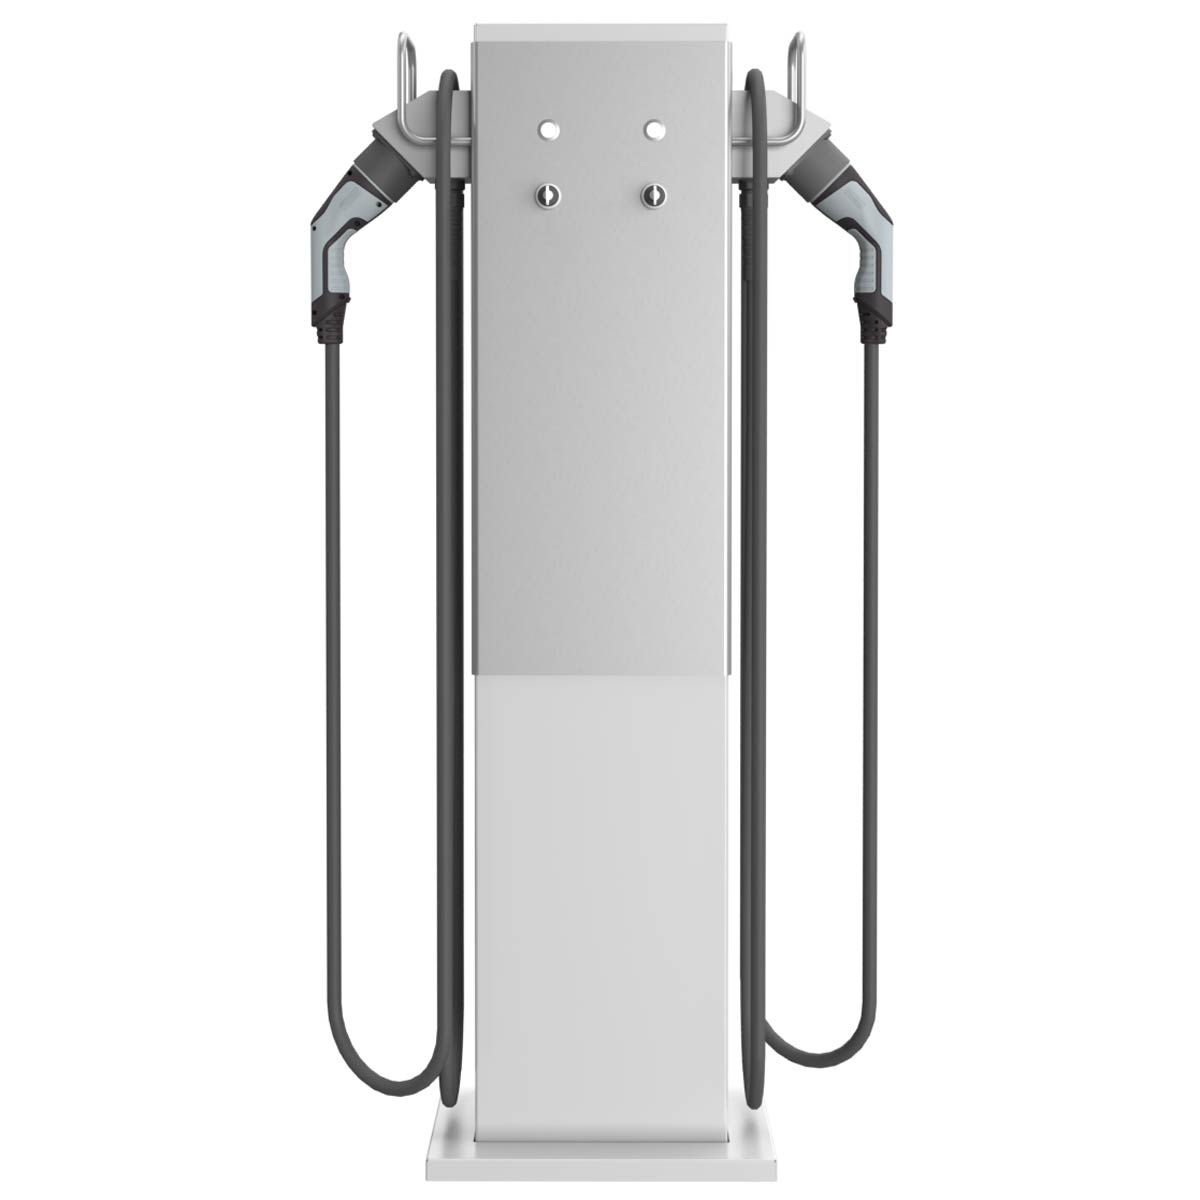 Ladesäule Draw BASIC Charge 2 - 22kW/32A - 11kW/16A mit 2x Typ 2 Ladekabel